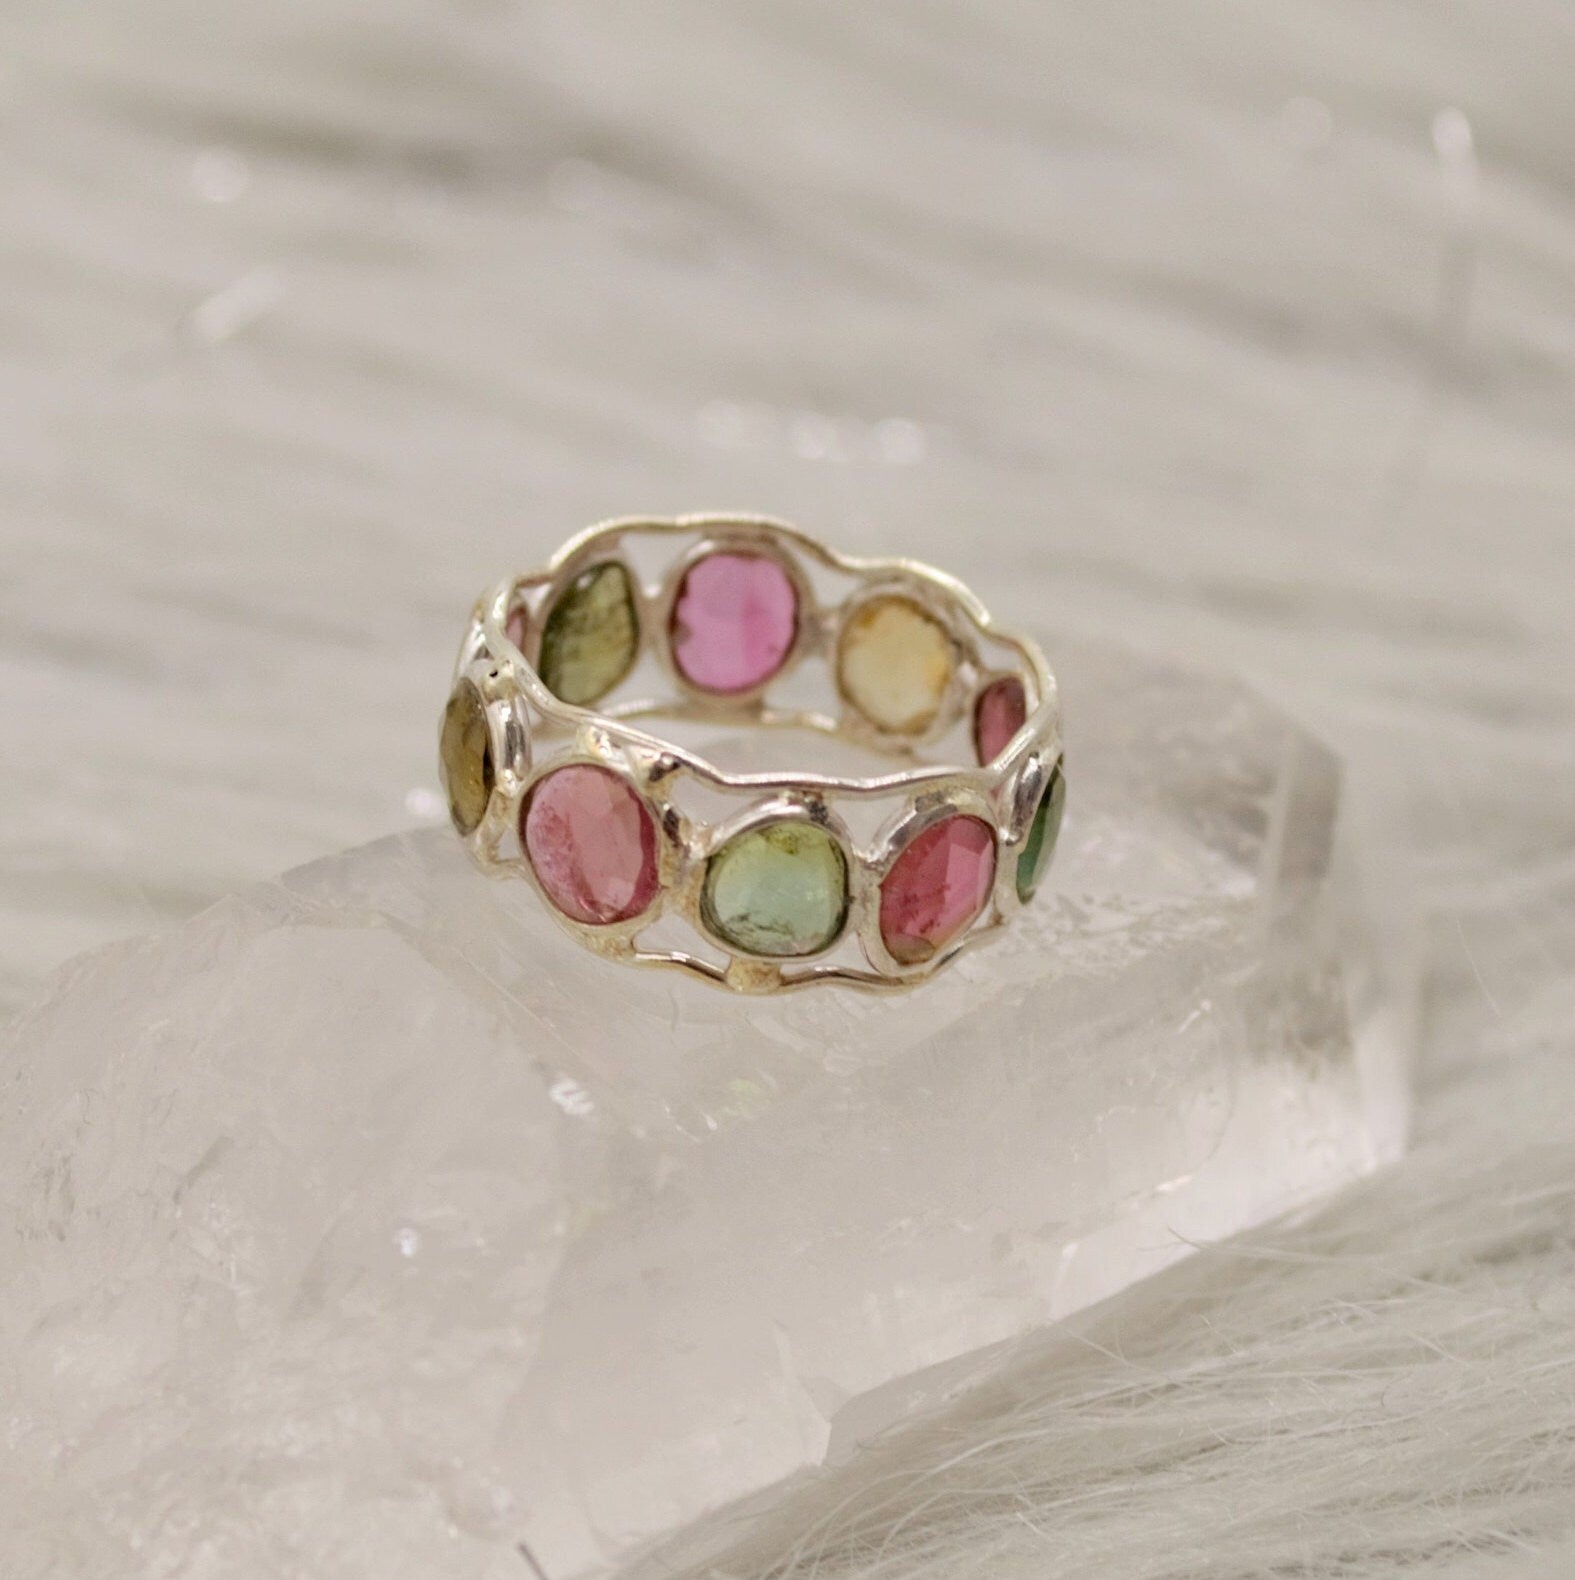 Tourmaline Ring, Stacking Silver Ring, Raw Gem Ring, Green, Pink Tourmaline Jewelry, Rings for Women, October Birthstone, Gift for Her